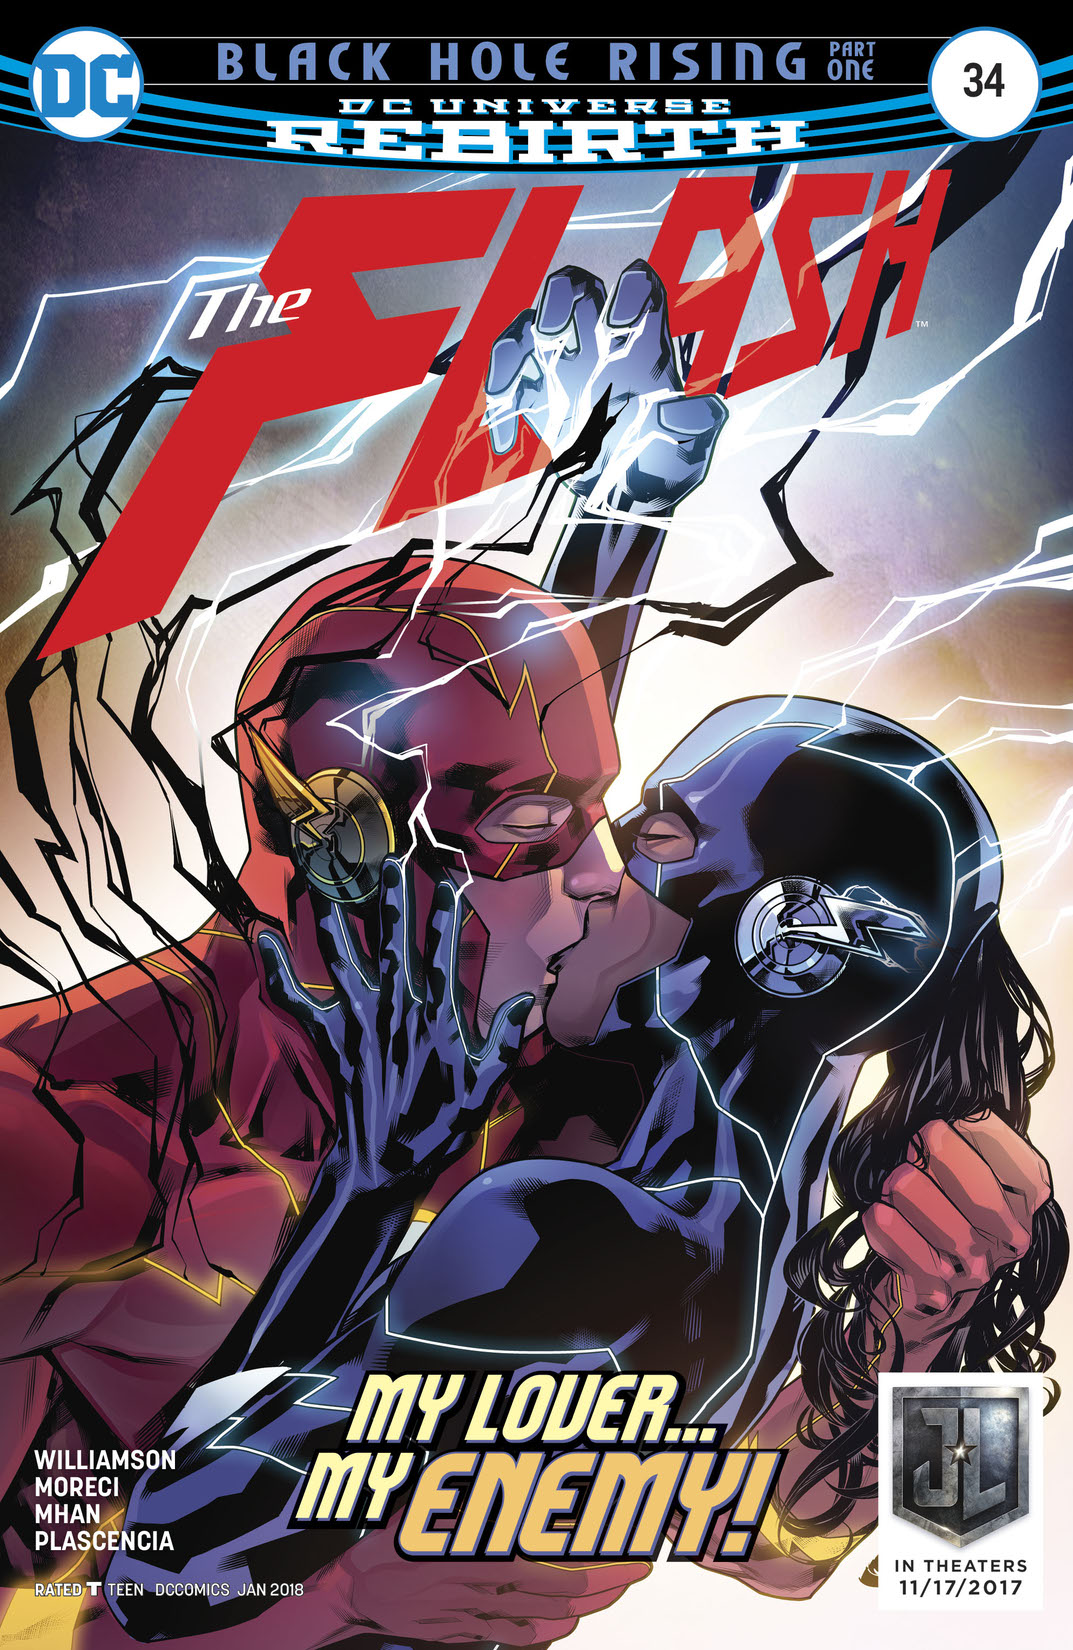 The Flash (2016-) #34 preview images